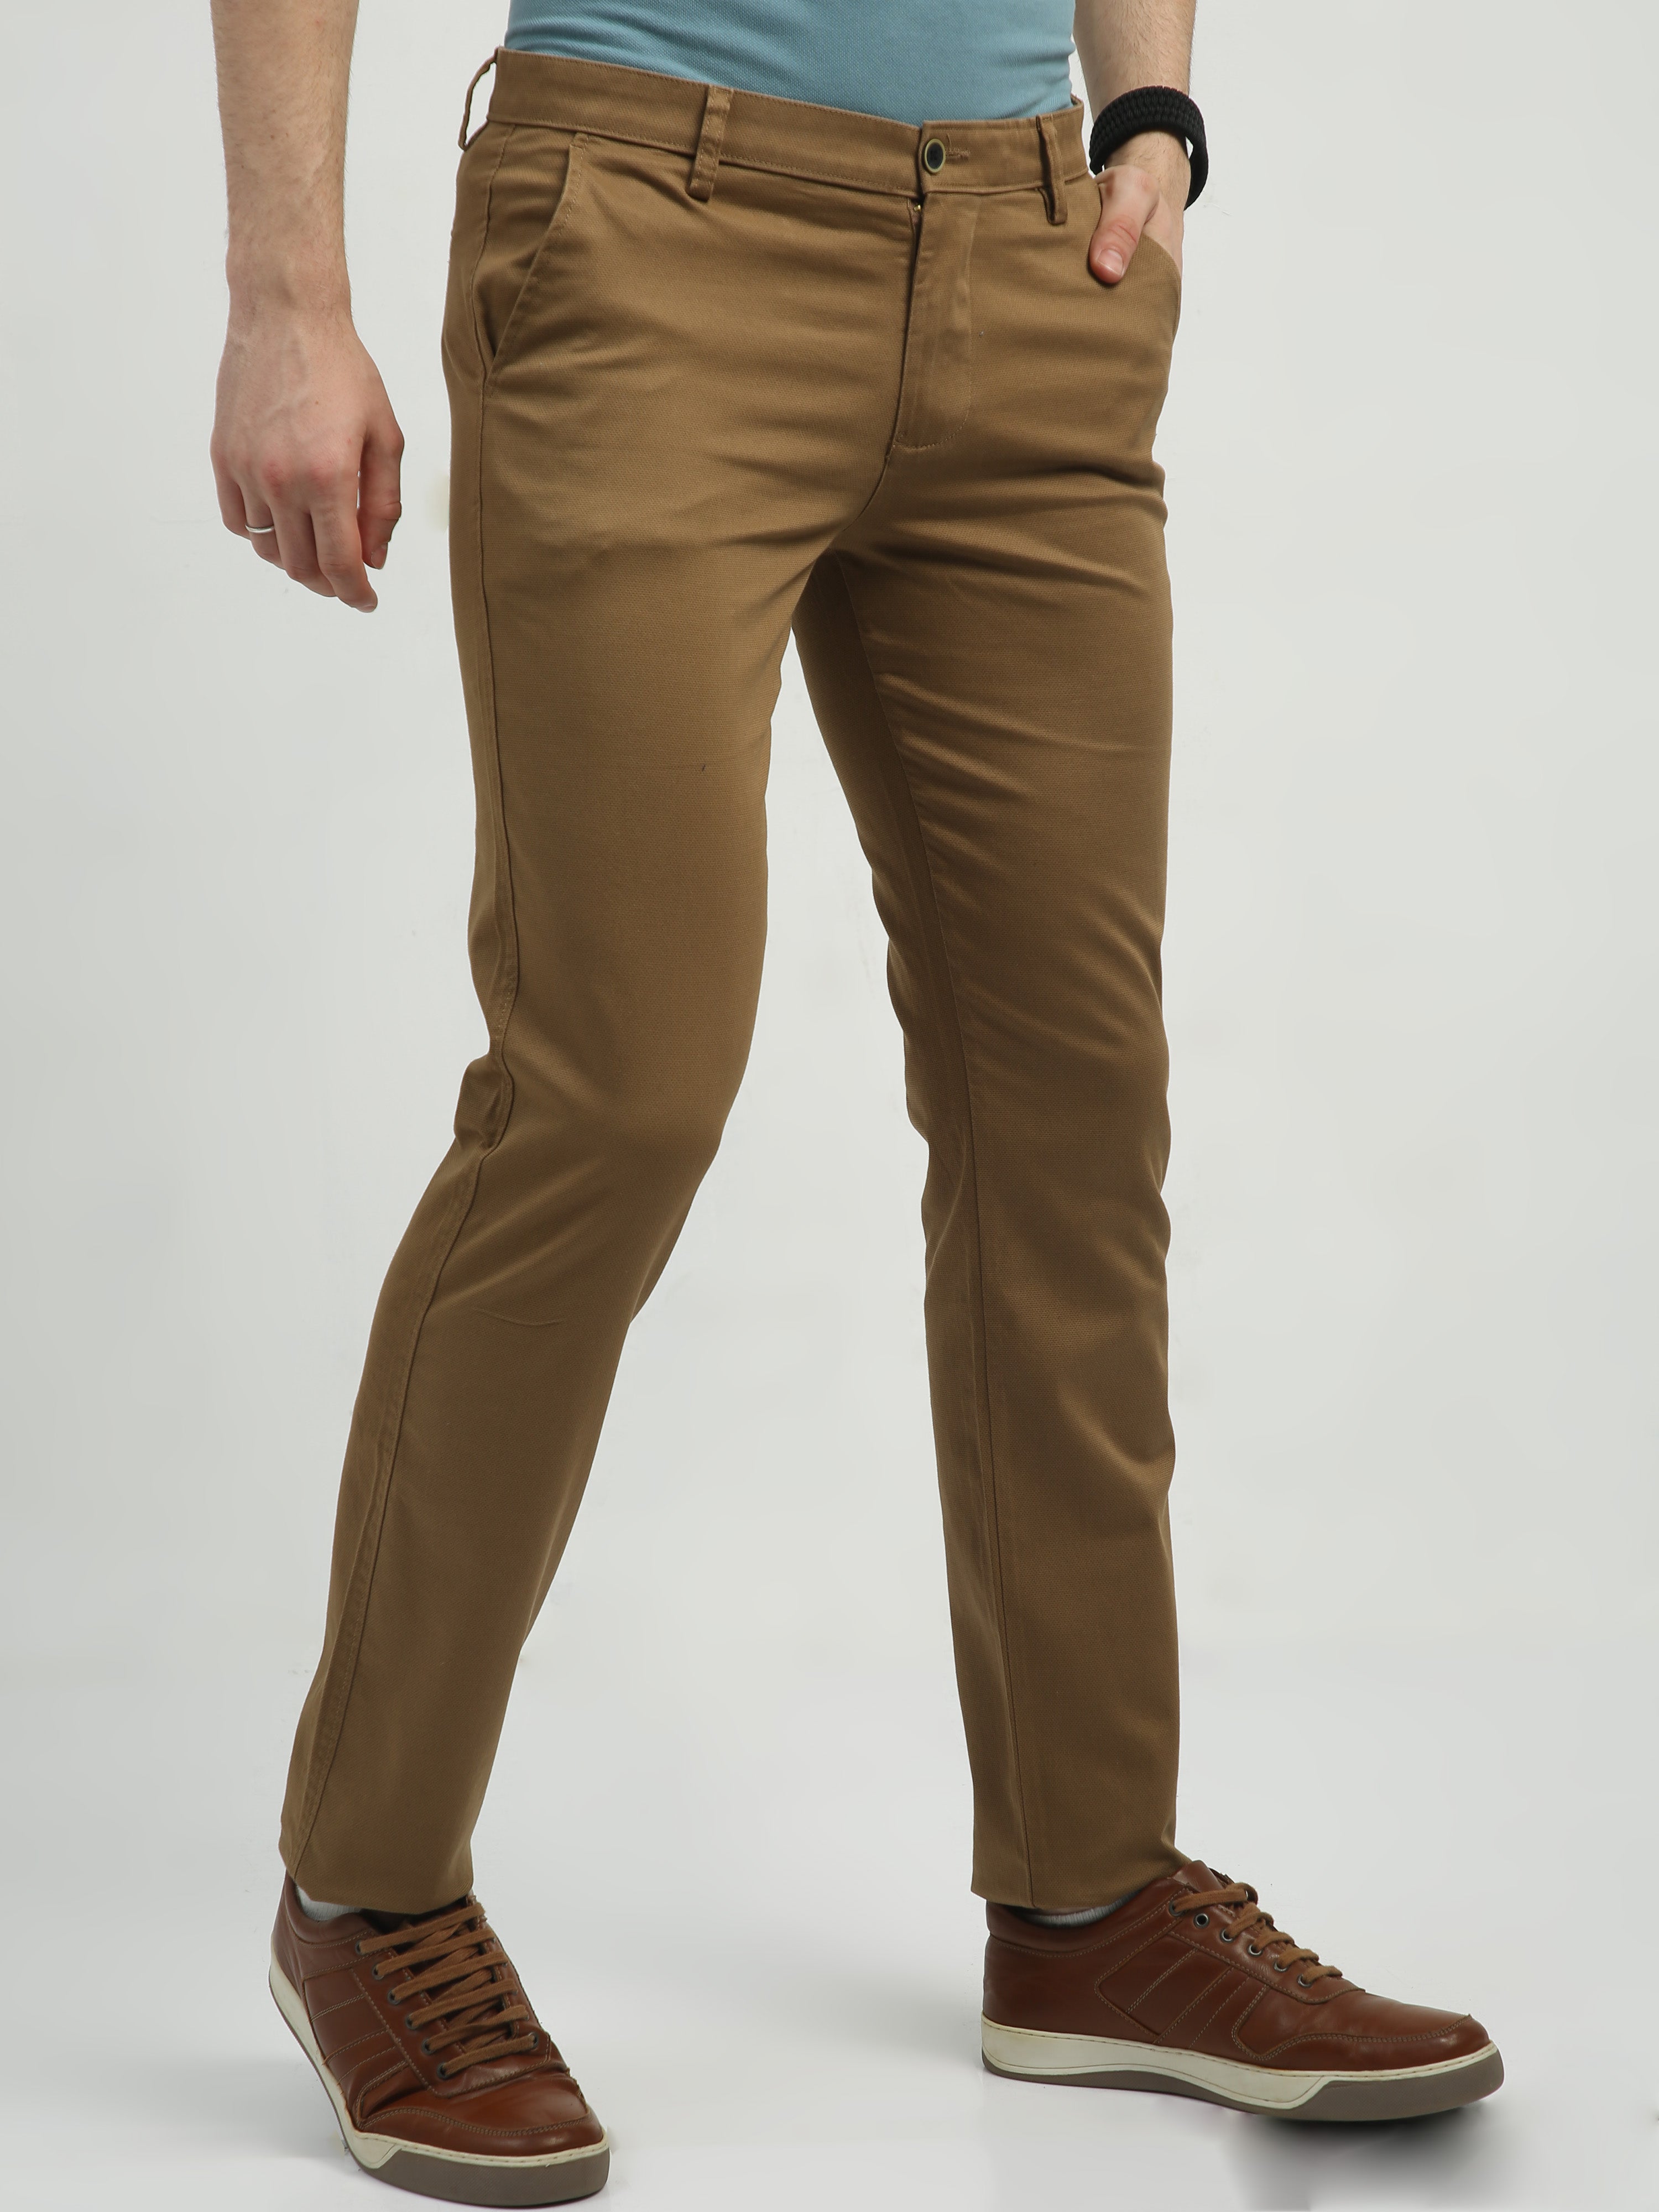 Classic Polo Men's   Chiseled Fit Cotton Trousers | TBO2-29 B-DKHA-CF-LY